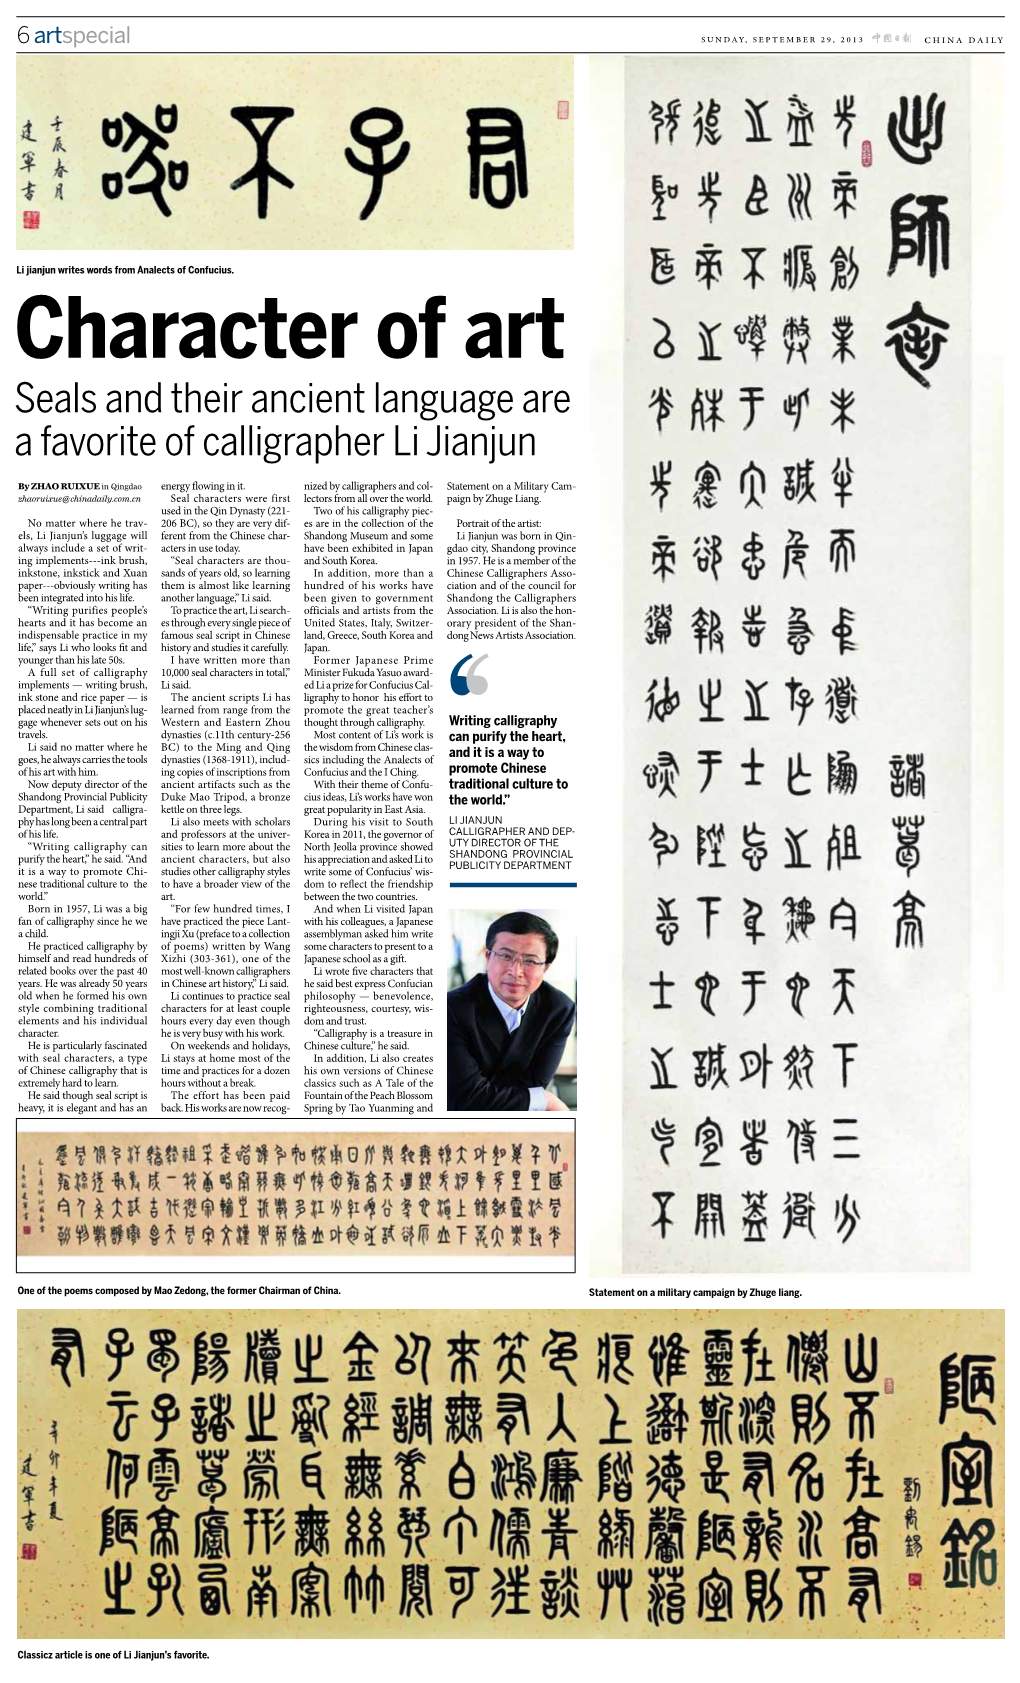 Seals and Their Ancient Language Are a Favorite of Calligrapher Li Jianjun